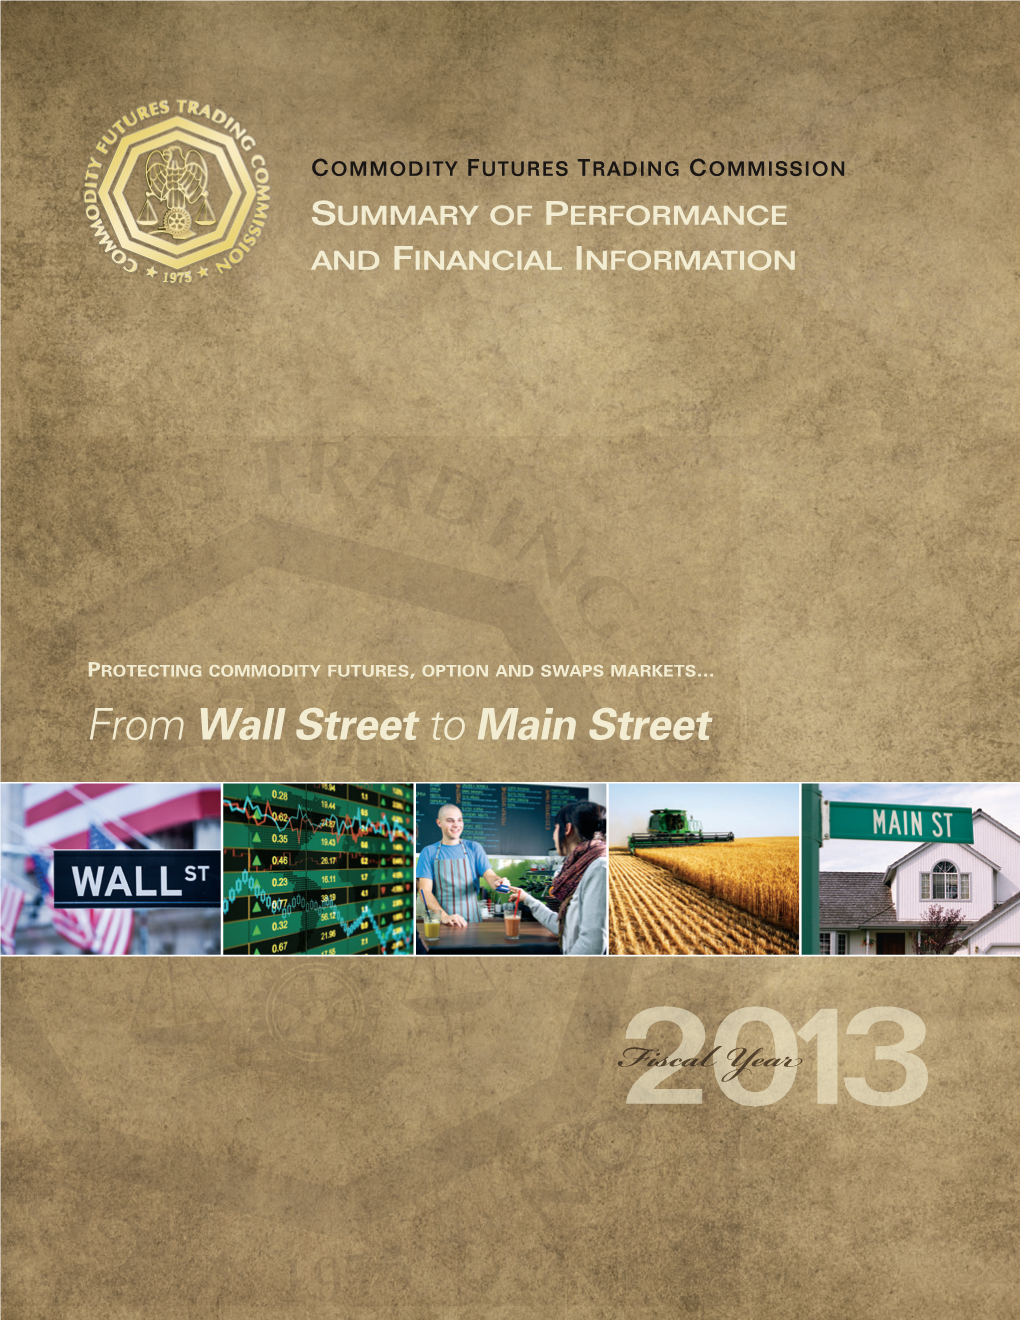 CFTC Summary of Performance and Financial Information for Fiscal Year 2013